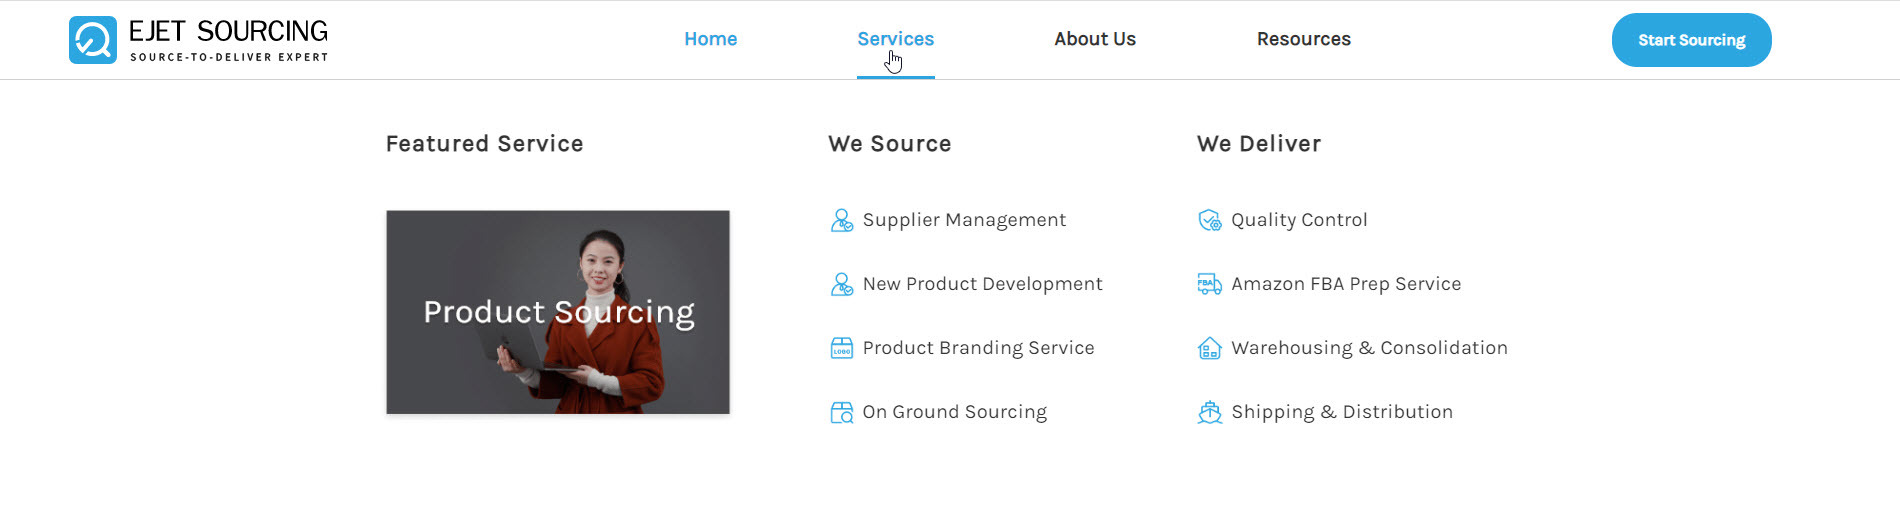 EJET Sourcing Services